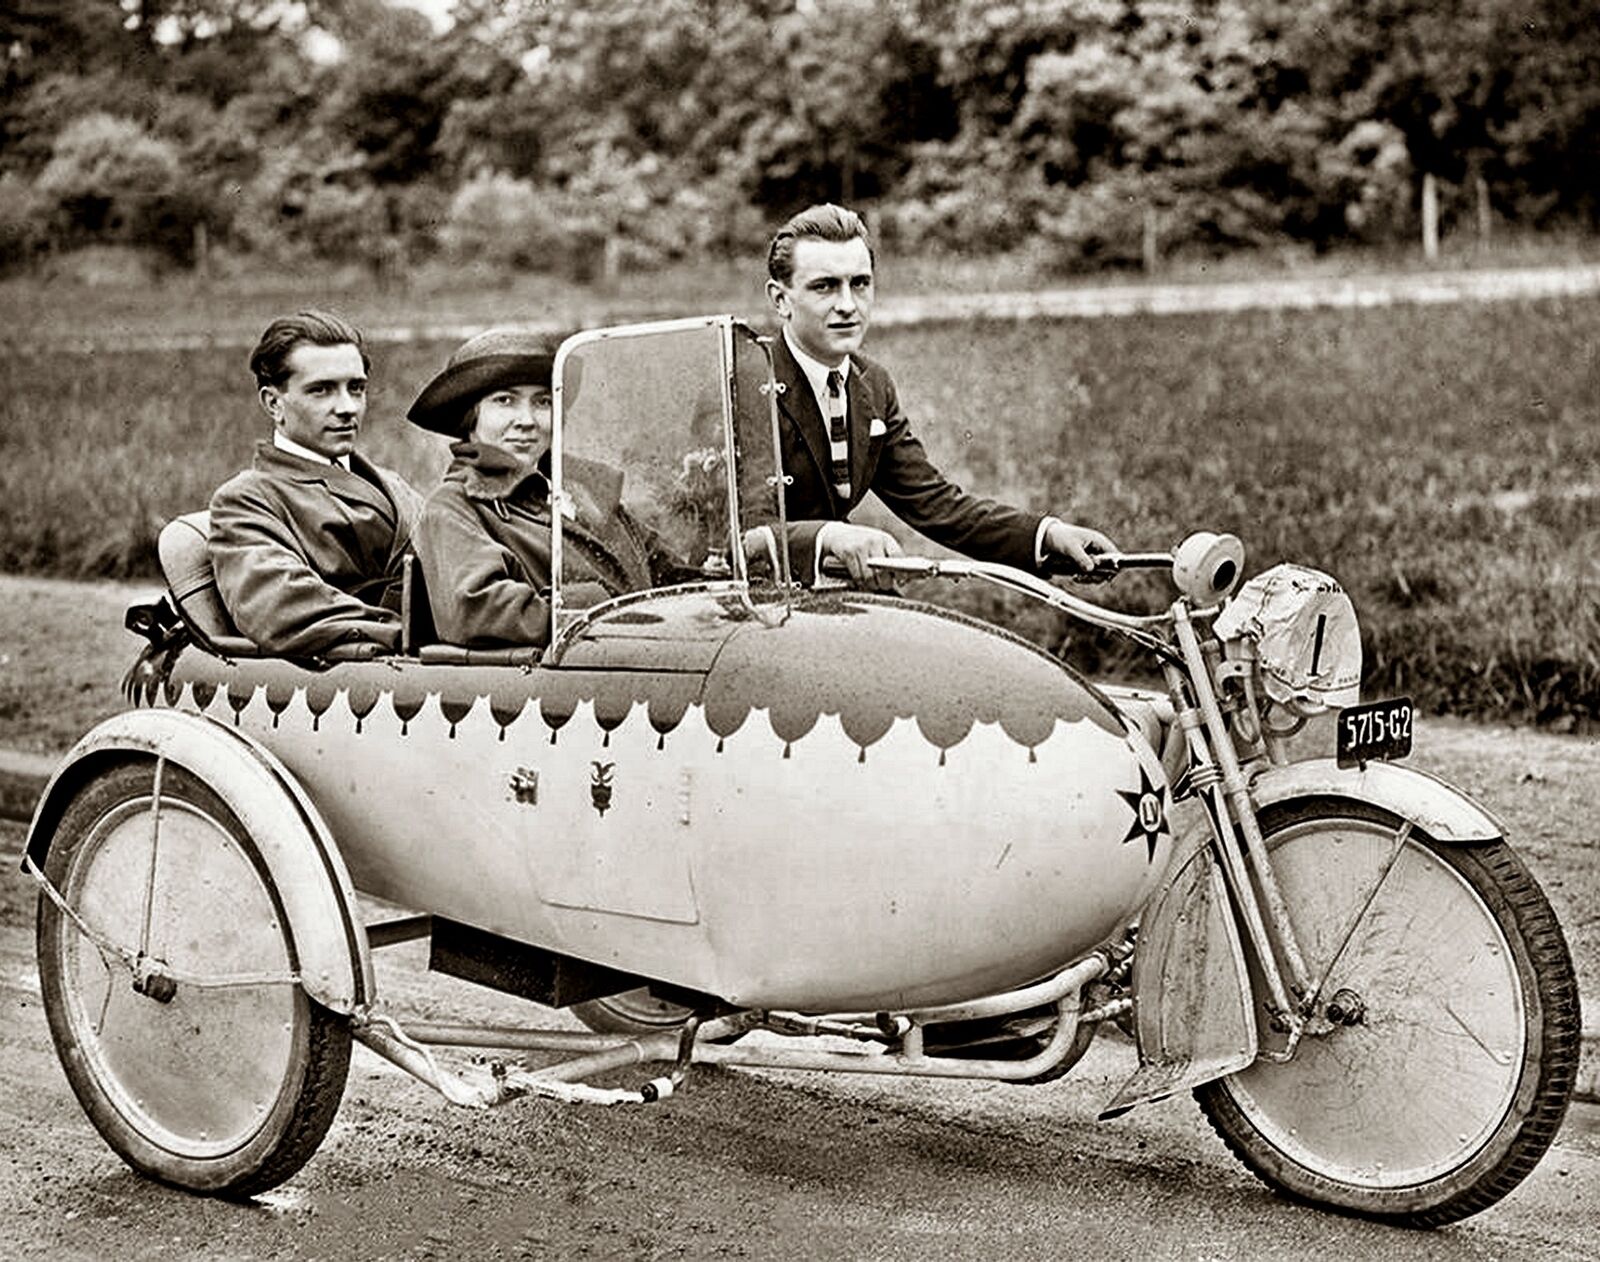 1922 MOTORCYCLE with Ornate Sidecar PHOTO  (183-T)